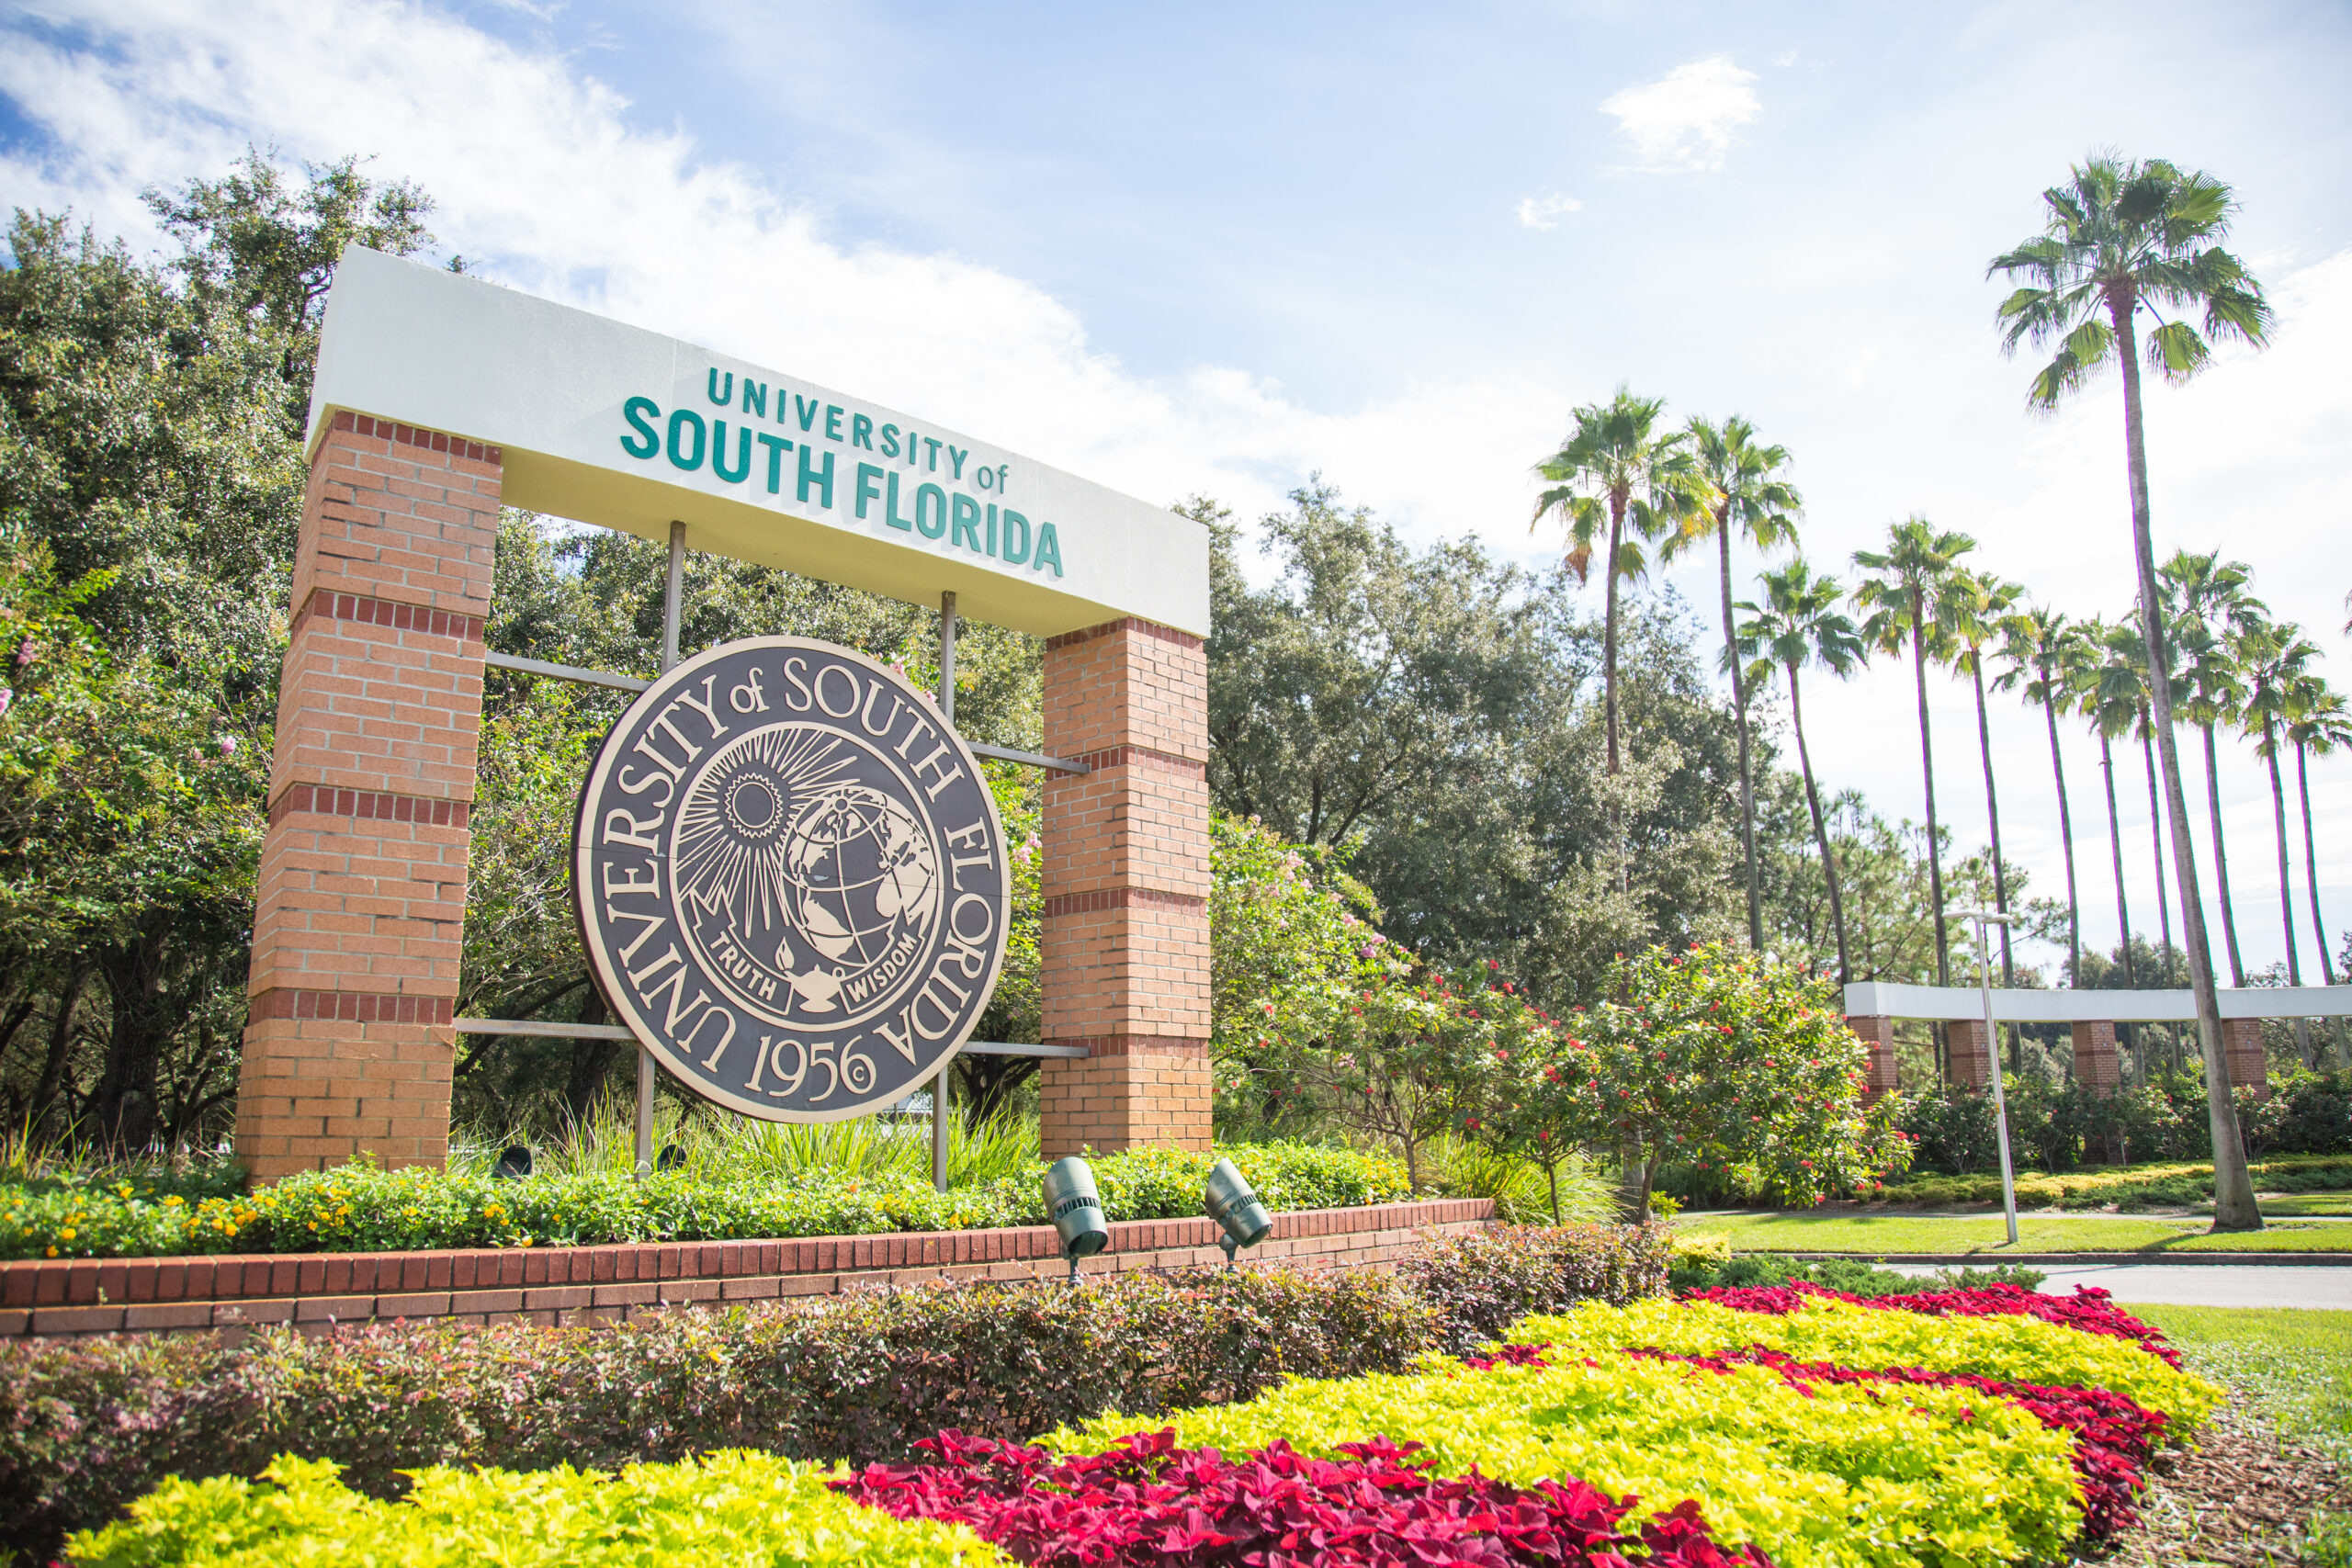 USF ranked among top 50 public universities in U.S. News and World Report ranking